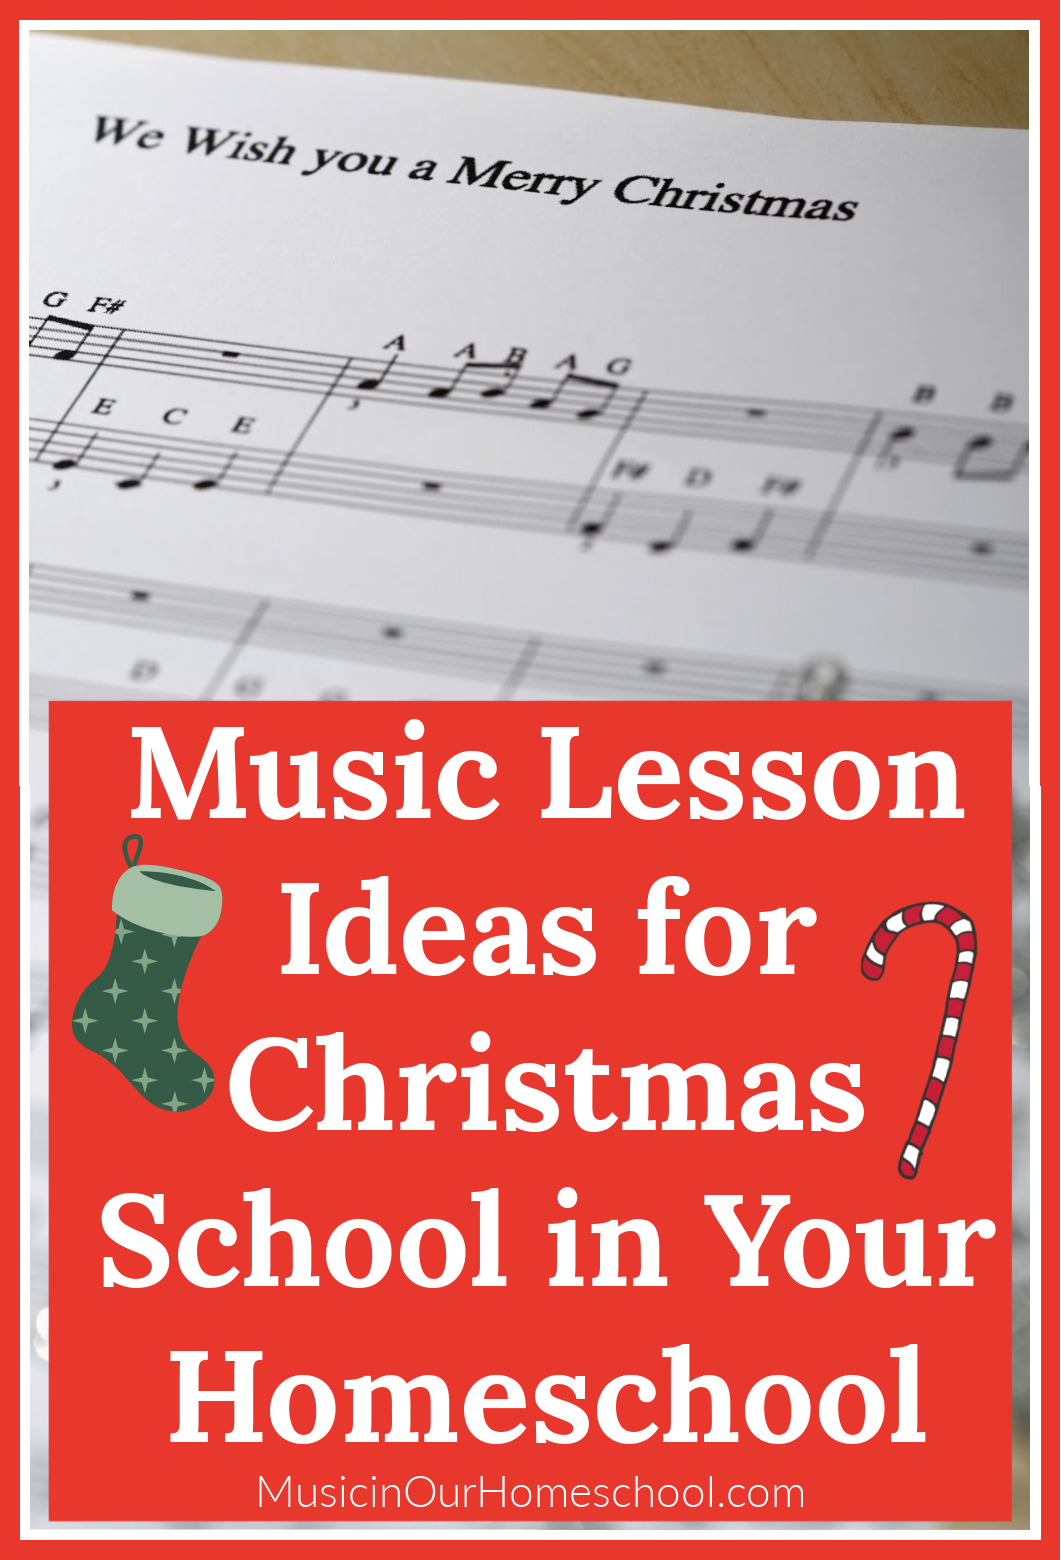 Music Lesson Ideas for Christmas School in Your Homeschool